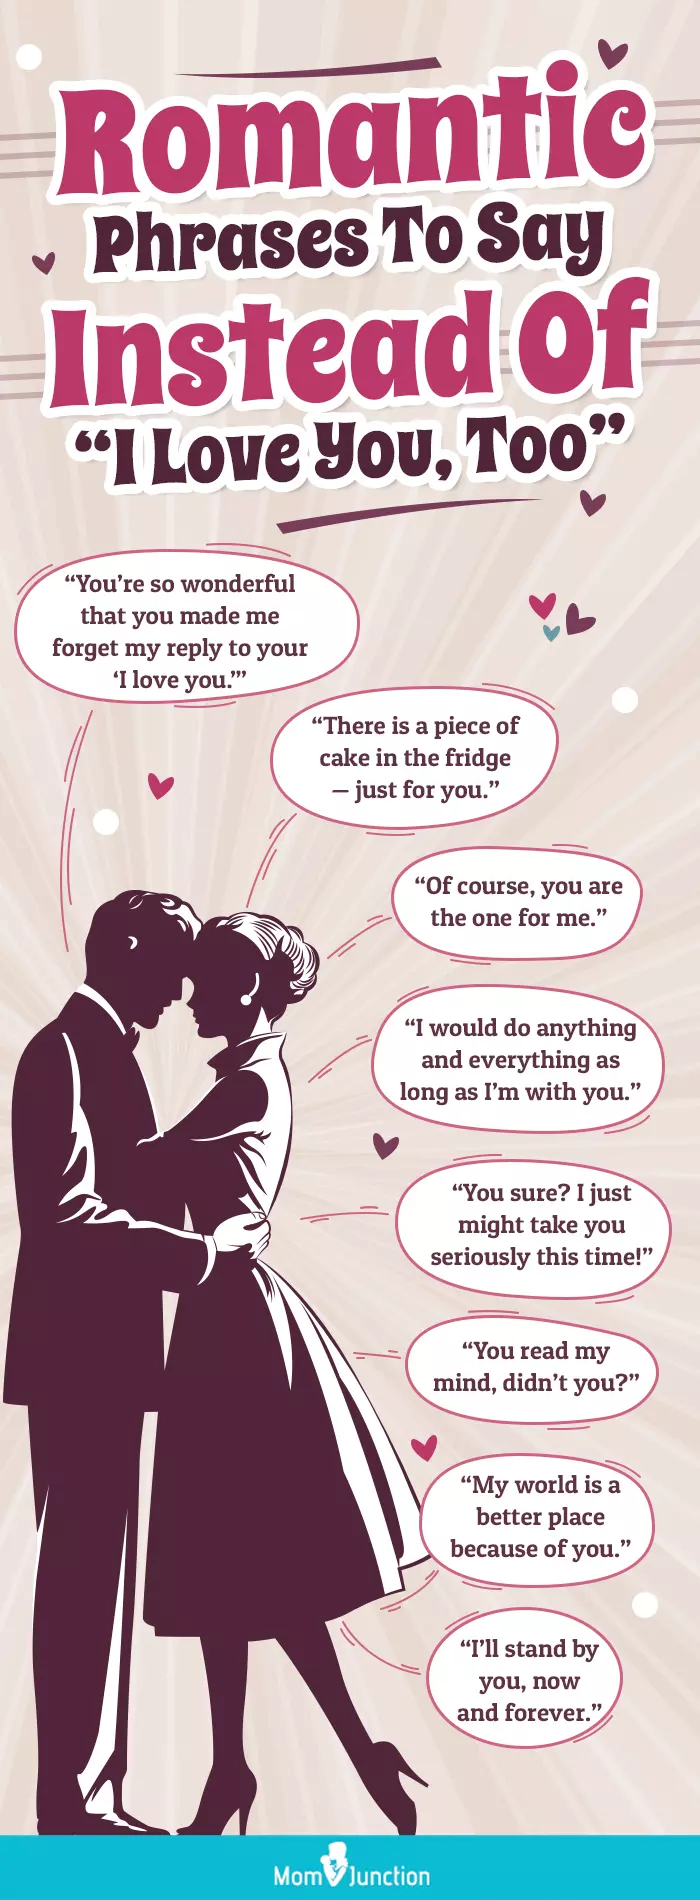 romantic phrases to say instead of i love you too (infographic)